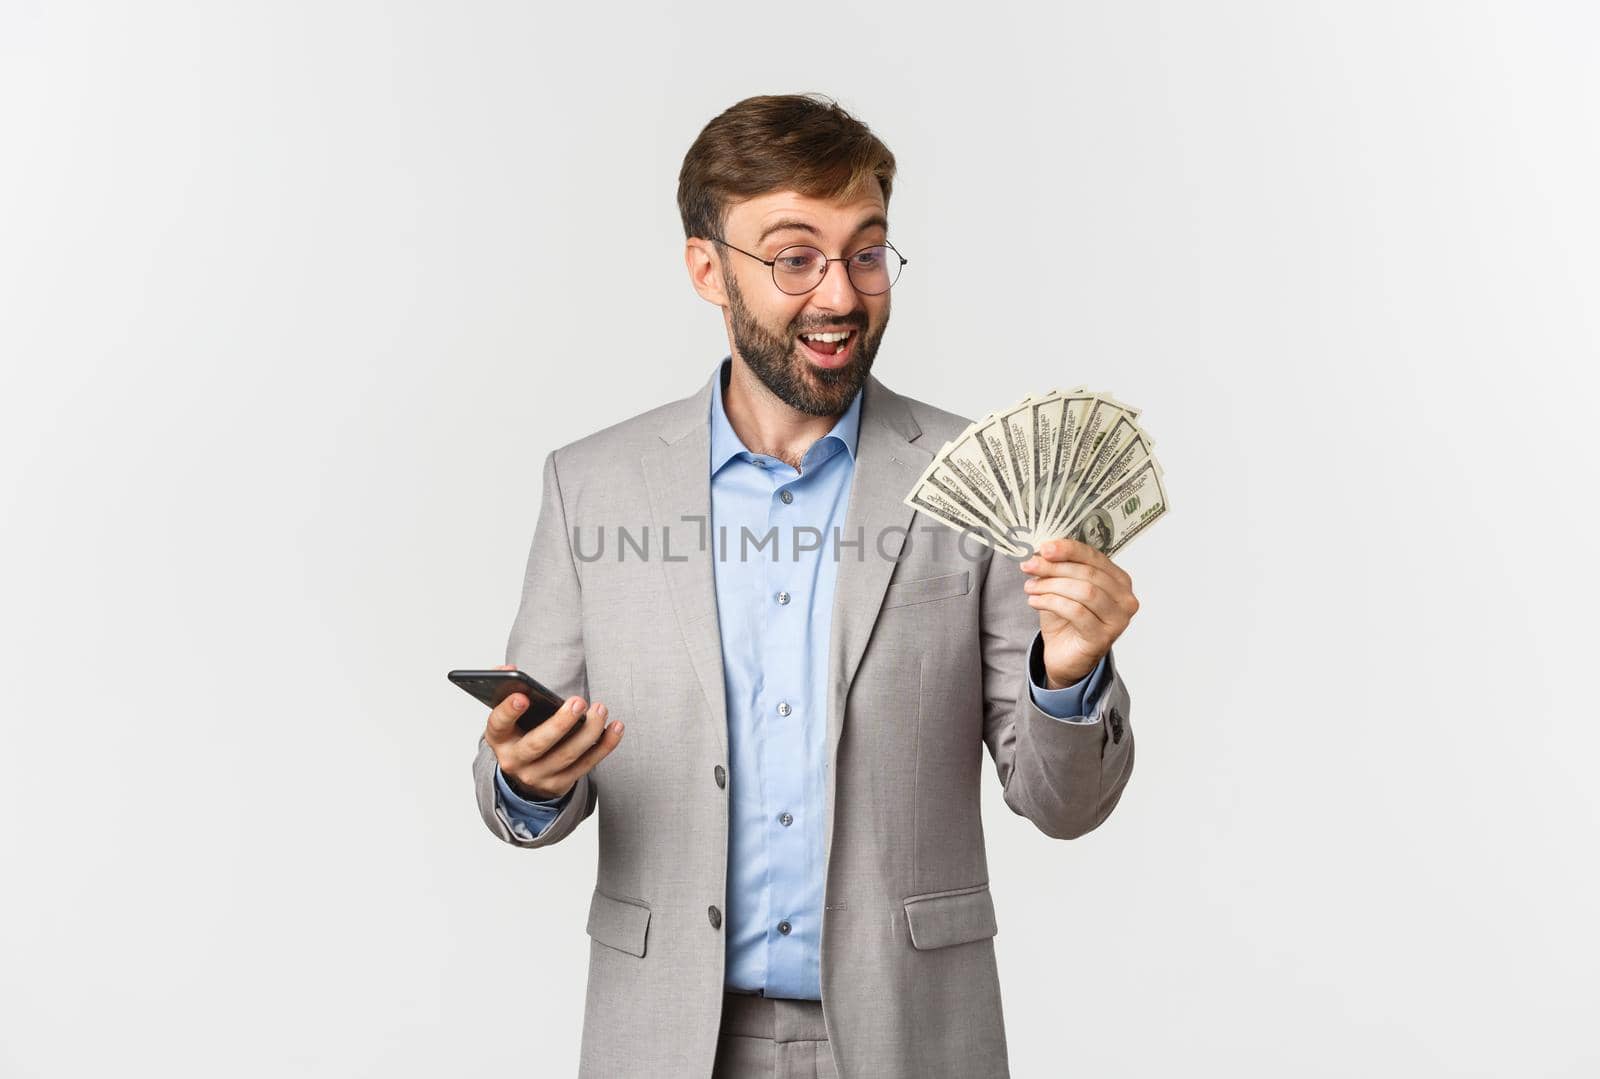 Image of rich successful businessman with beard, looking at money and holding mobile phone, smiling excited, standing over white background.